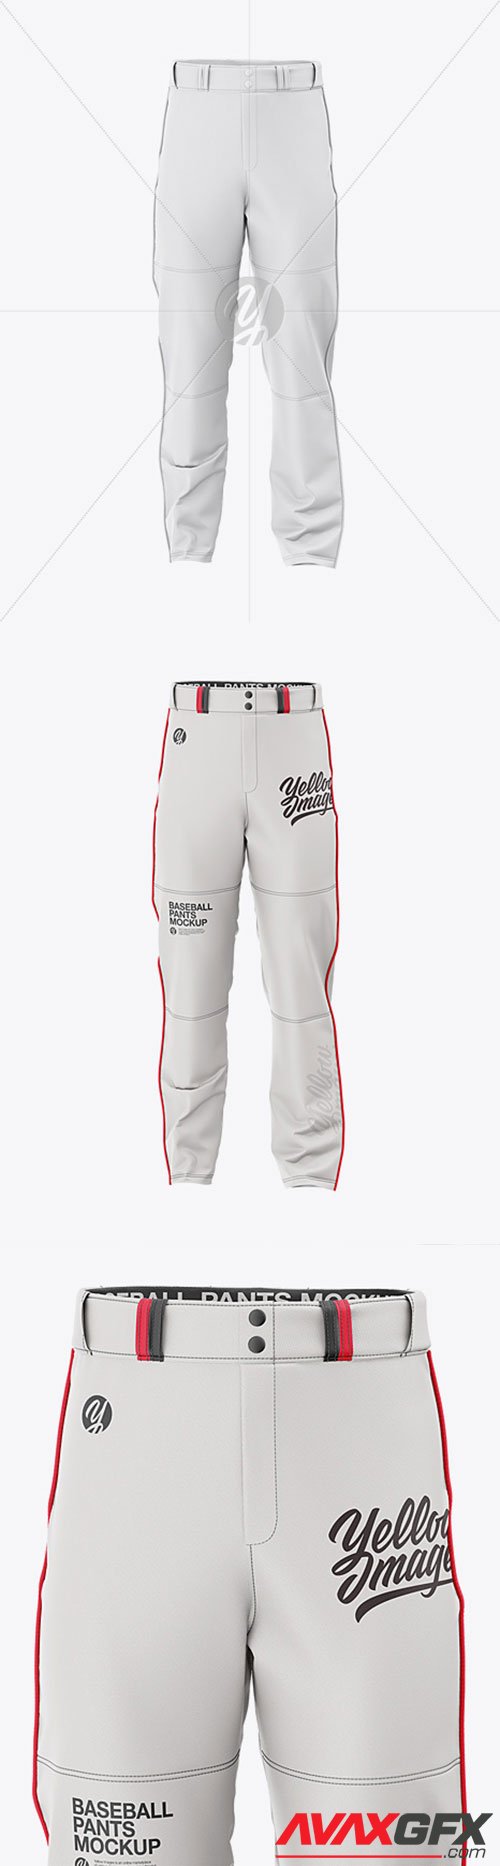 Fit Piped Baseball Pants - Front View 31554